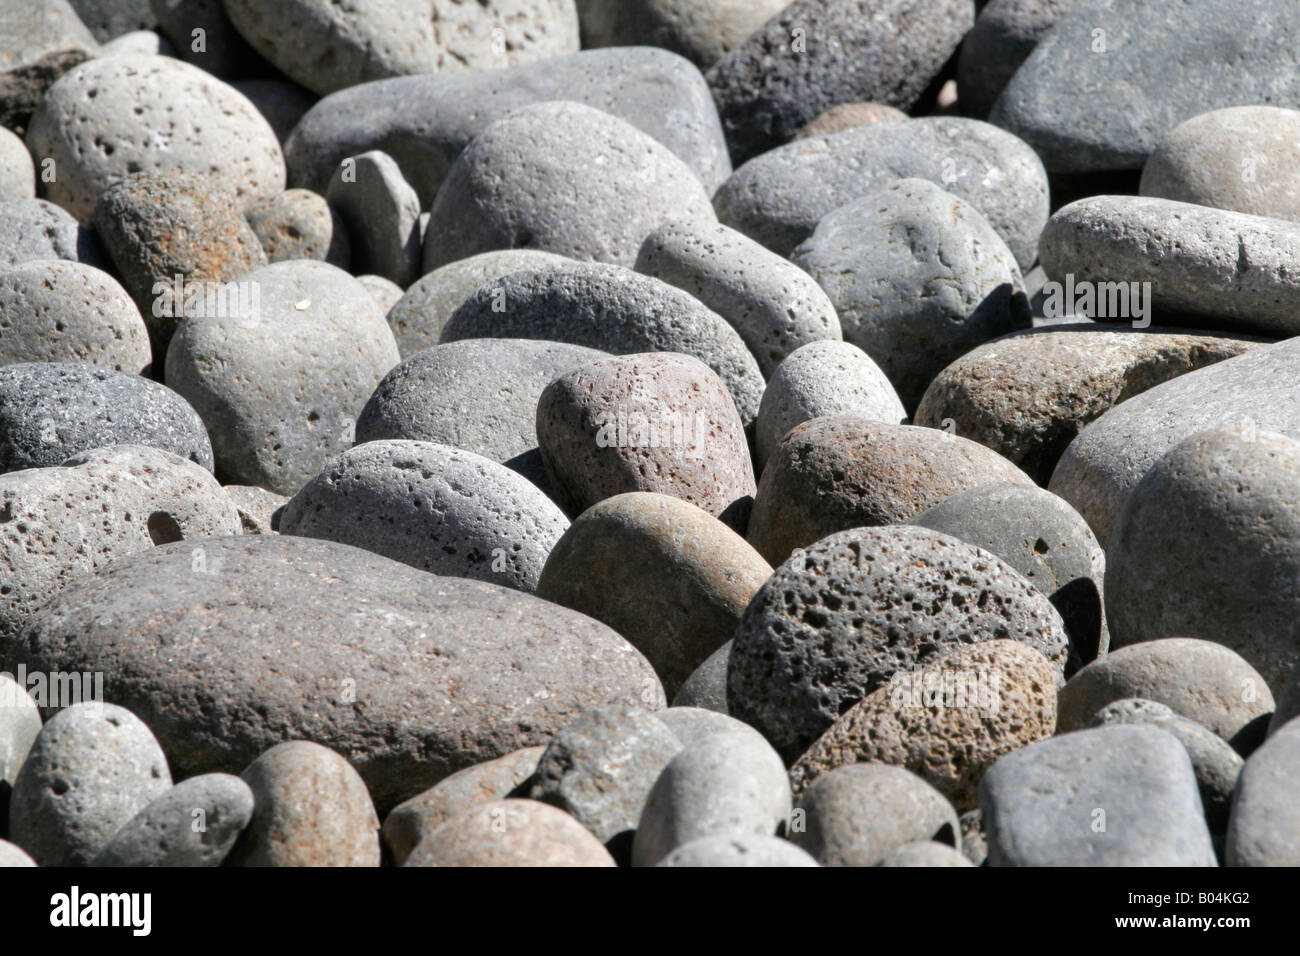 Smooth Tumbled Gray River Stones With White Stripes Stock Photo - Download  Image Now - iStock